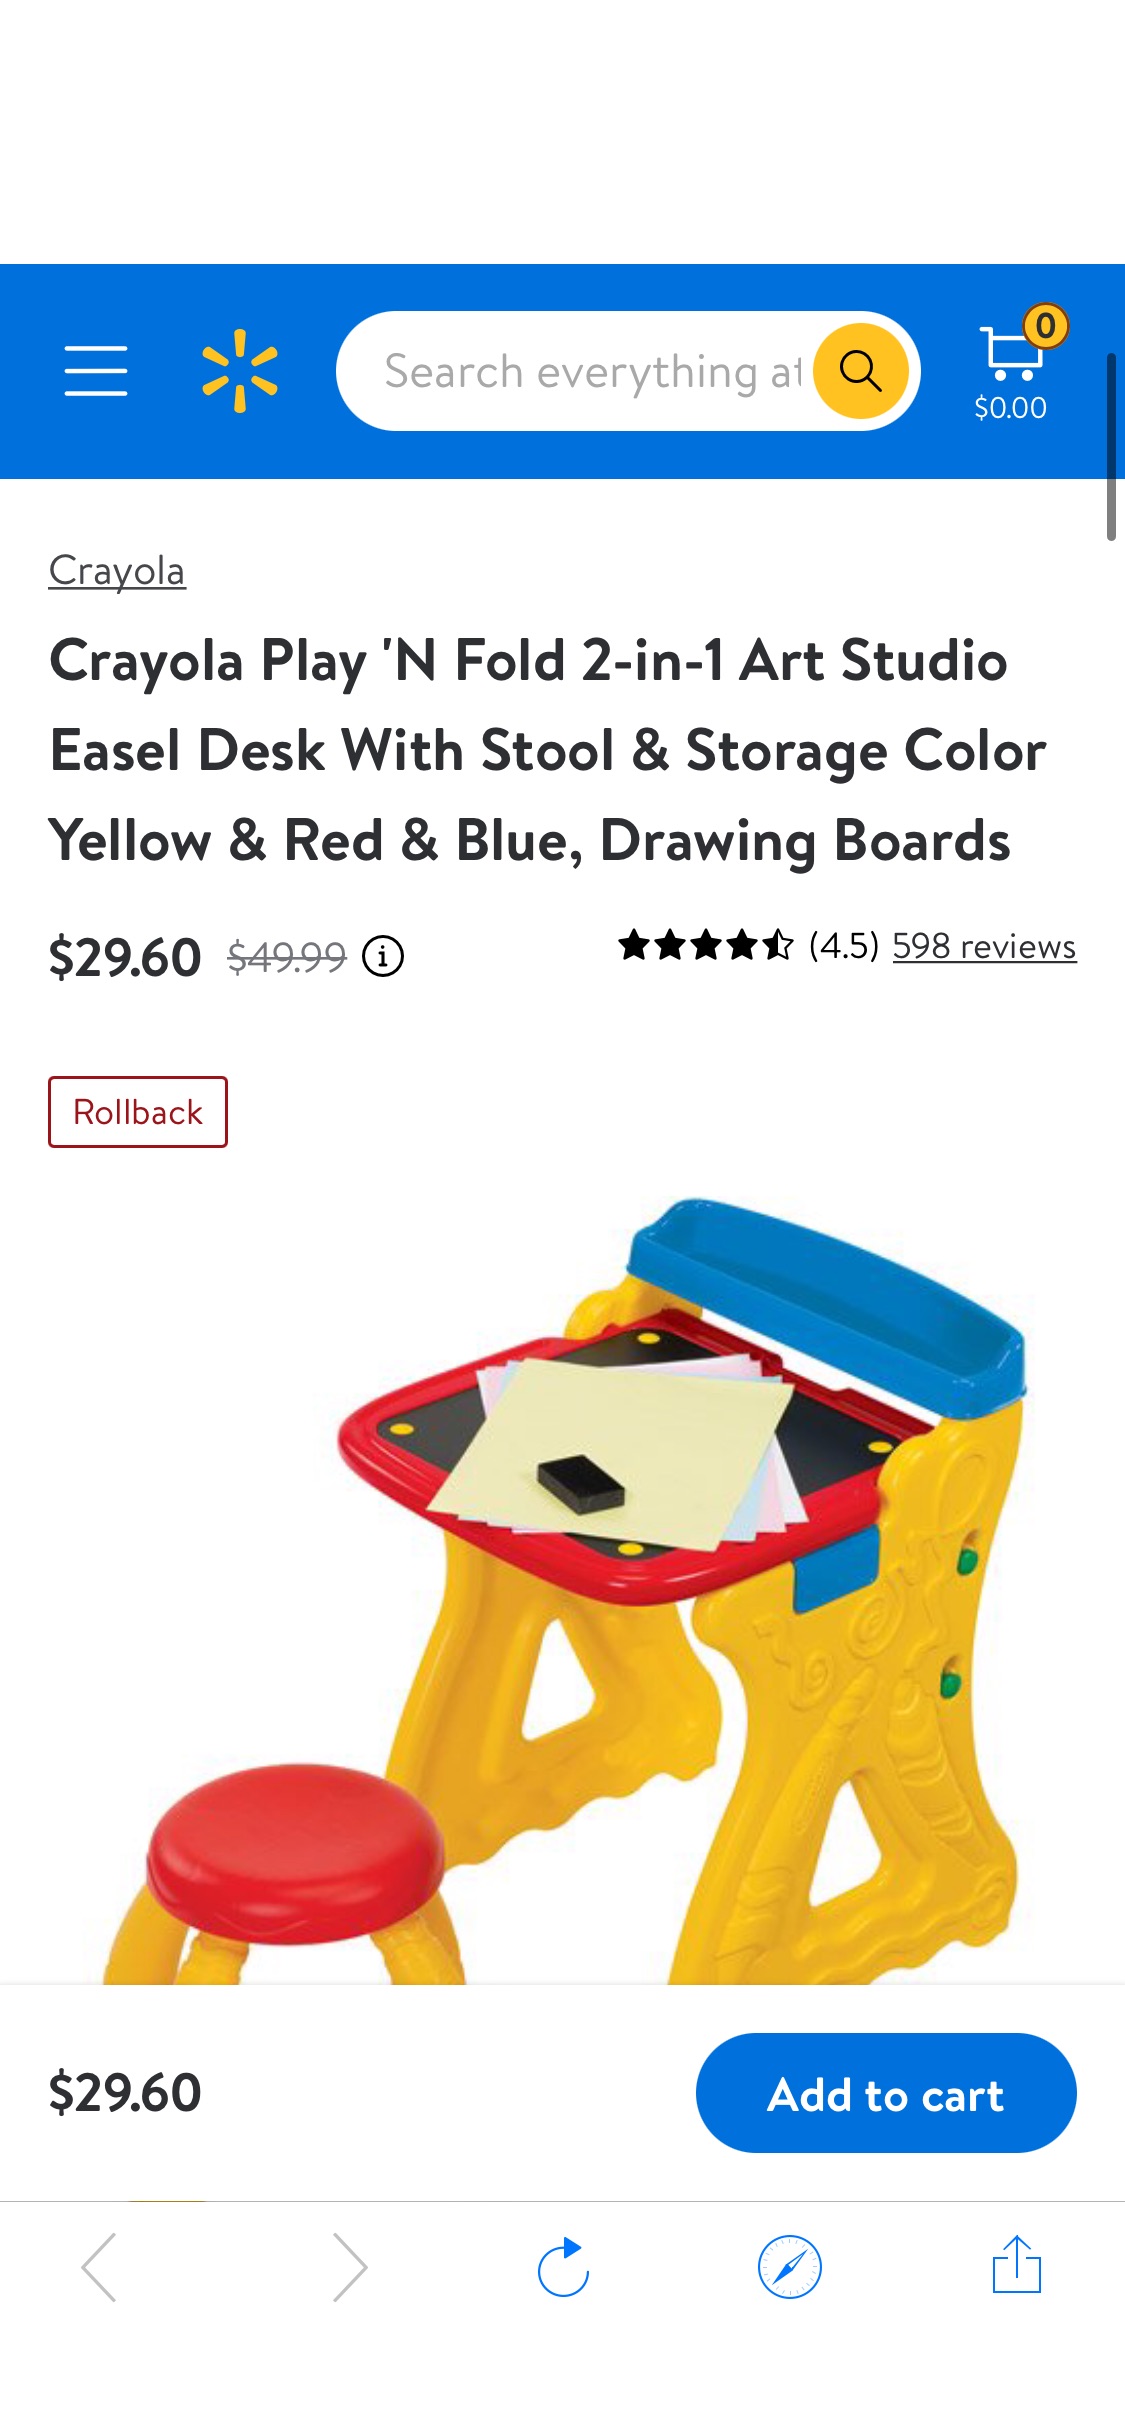 Crayola Play 'N Fold 2-in-1 Art Studio Easel Desk With Stool & Storage Color Yellow & Red & Blue, Drawing Boards - Walmart.com为